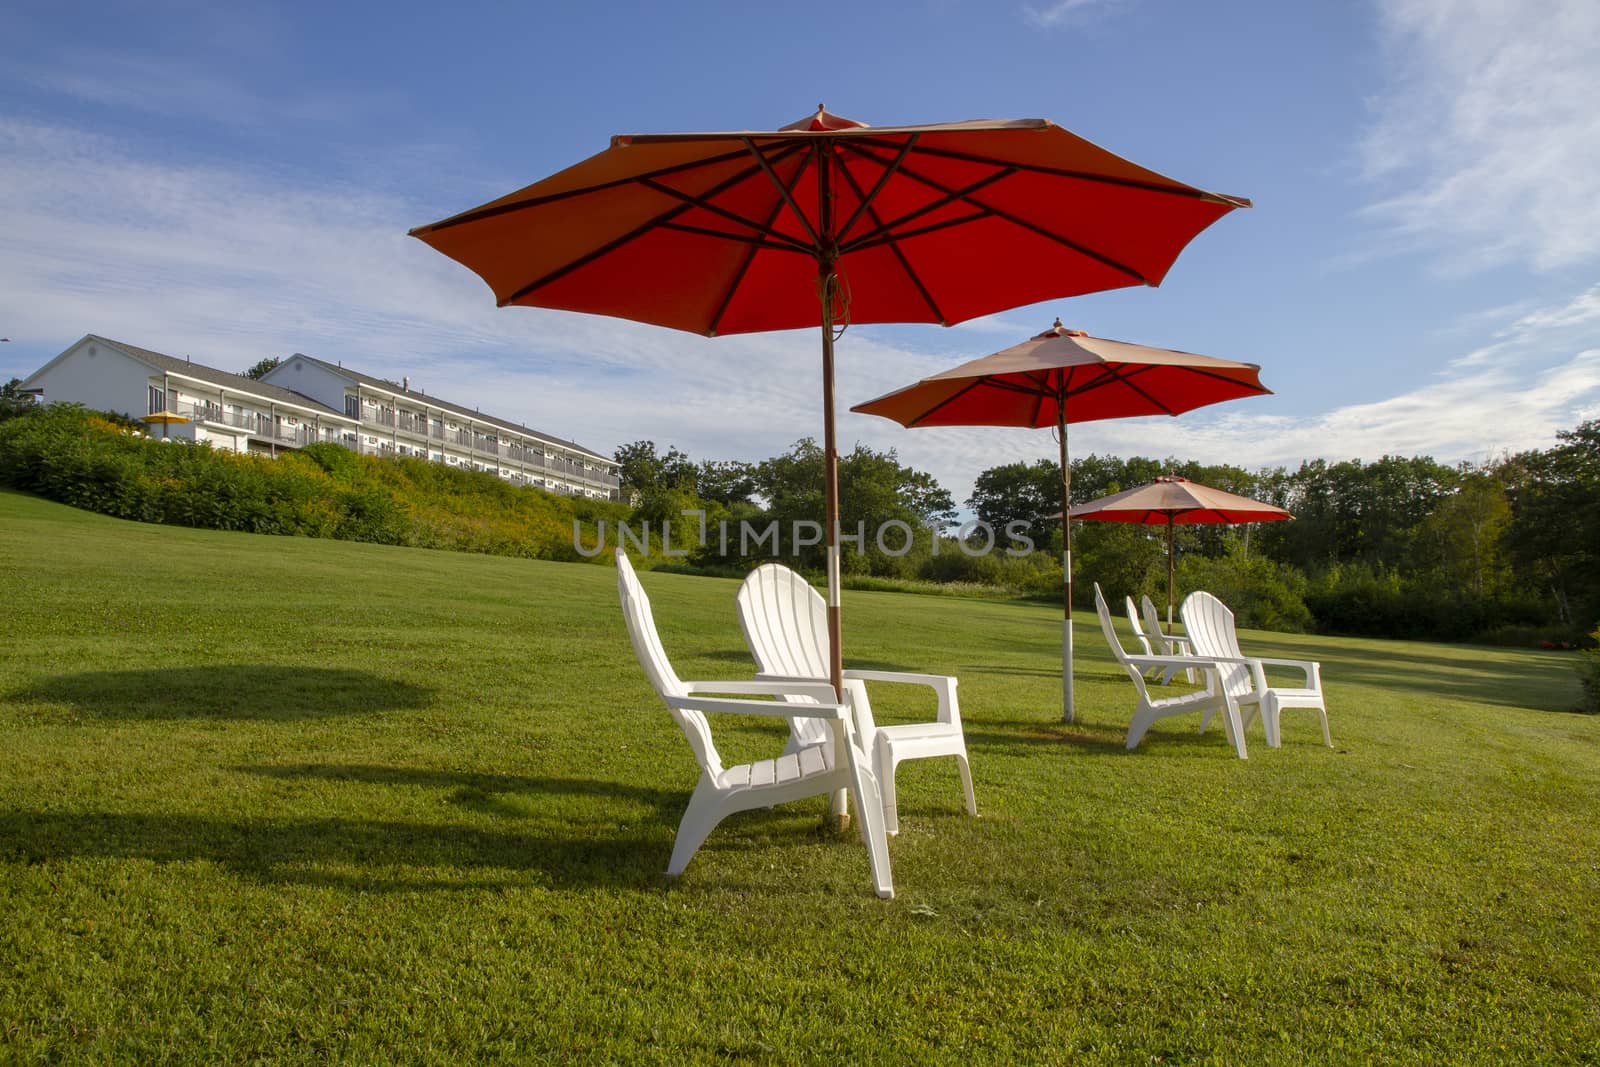 plastic chairs and umbrella on grass in the sun and blue sky